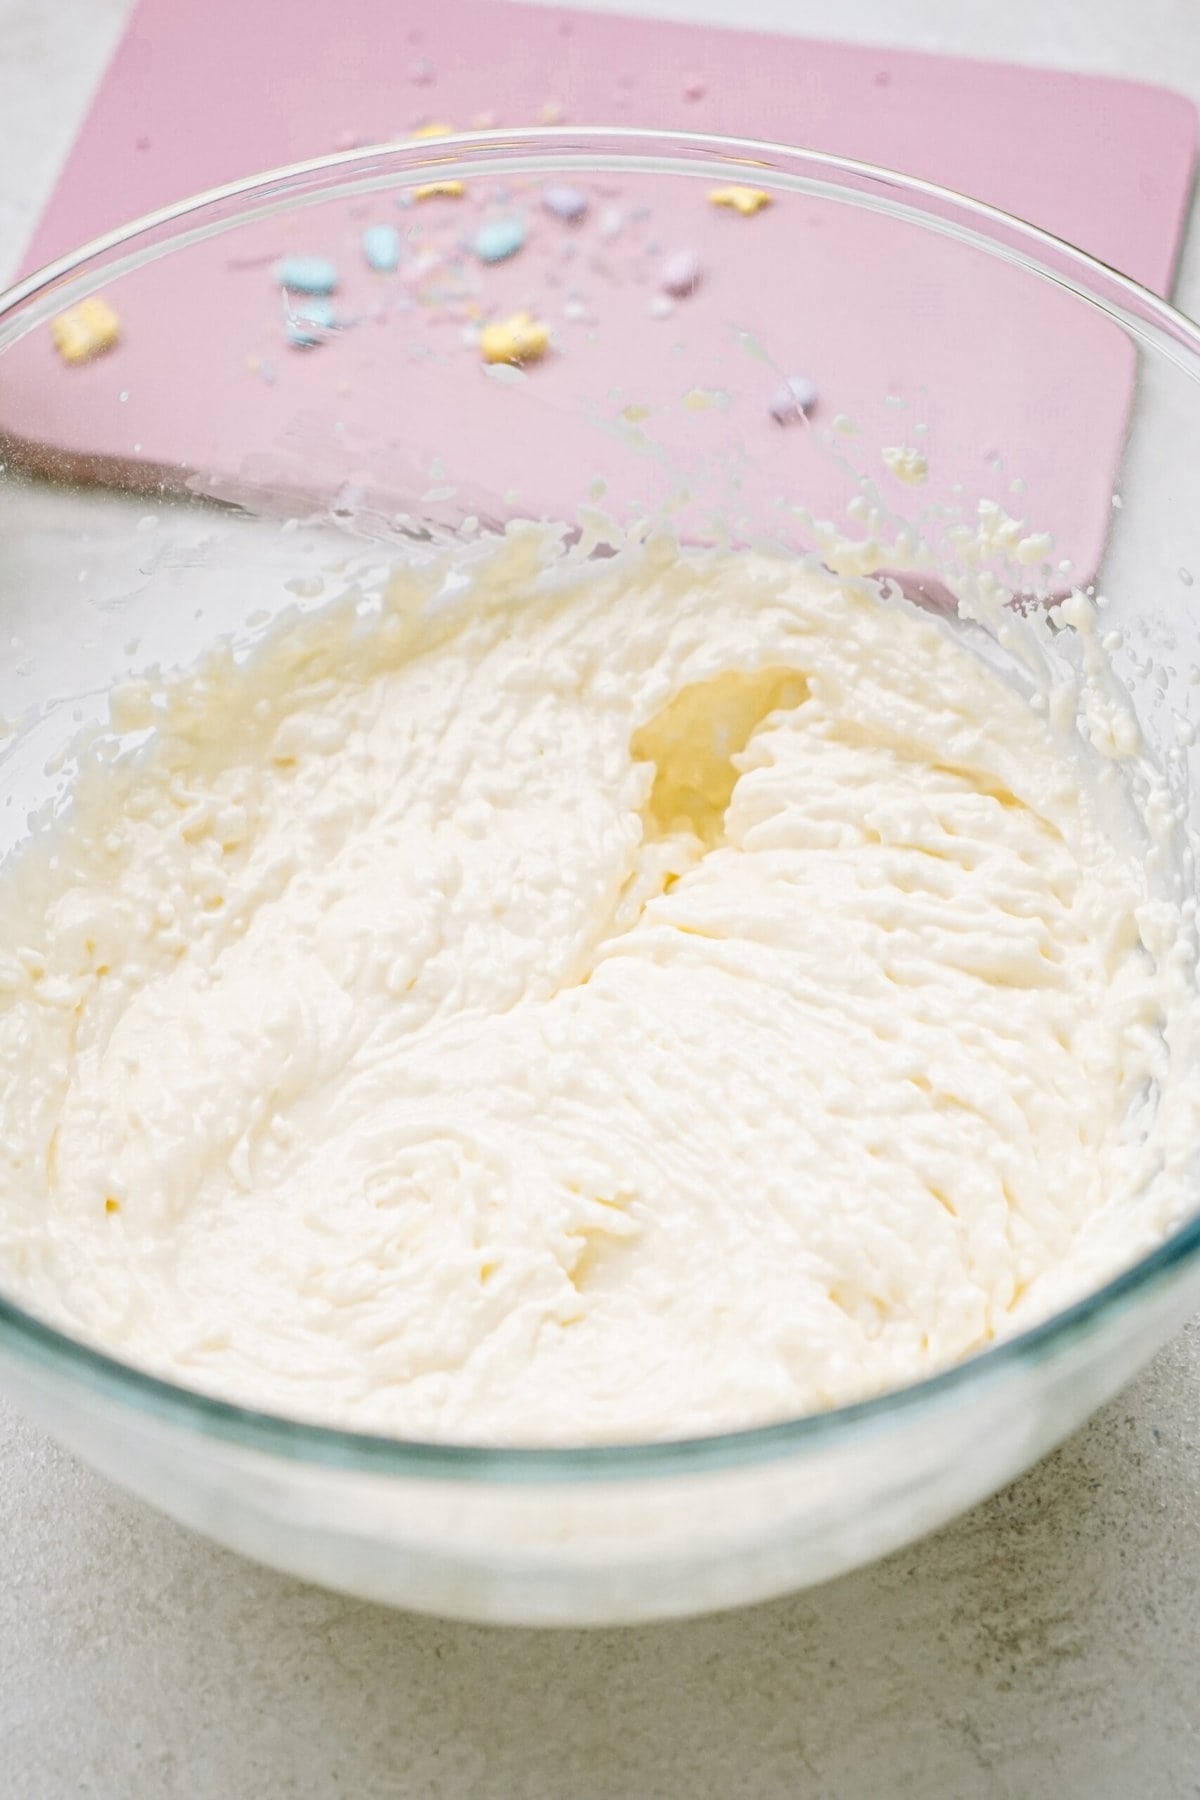 Bowl of frosting on a kitchen counter with a pink spatula in the background.